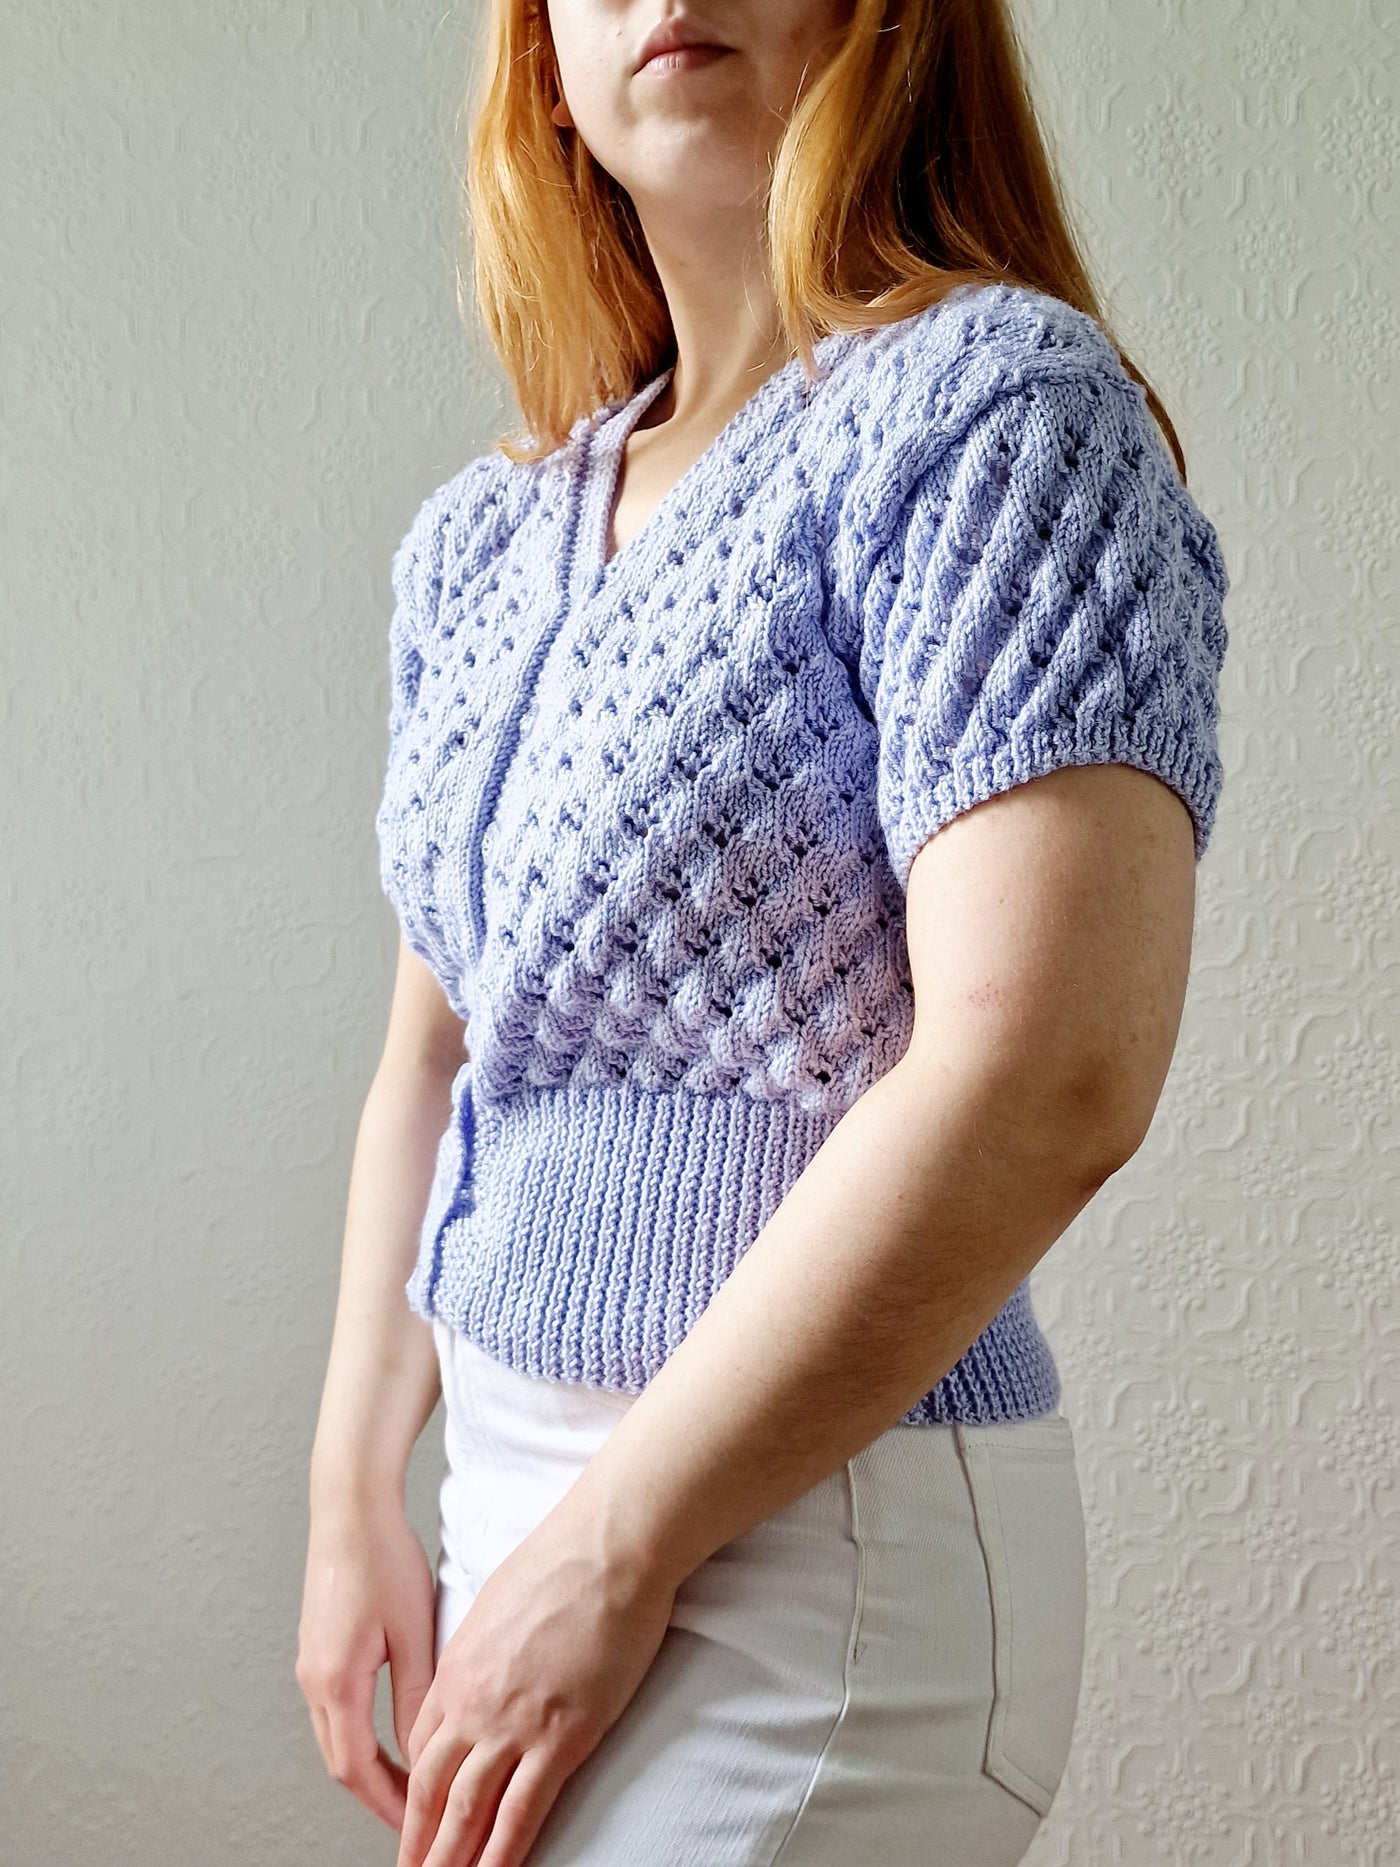 Vintage Purple Knitted Jumper Top with Short Sleeves - XS/S